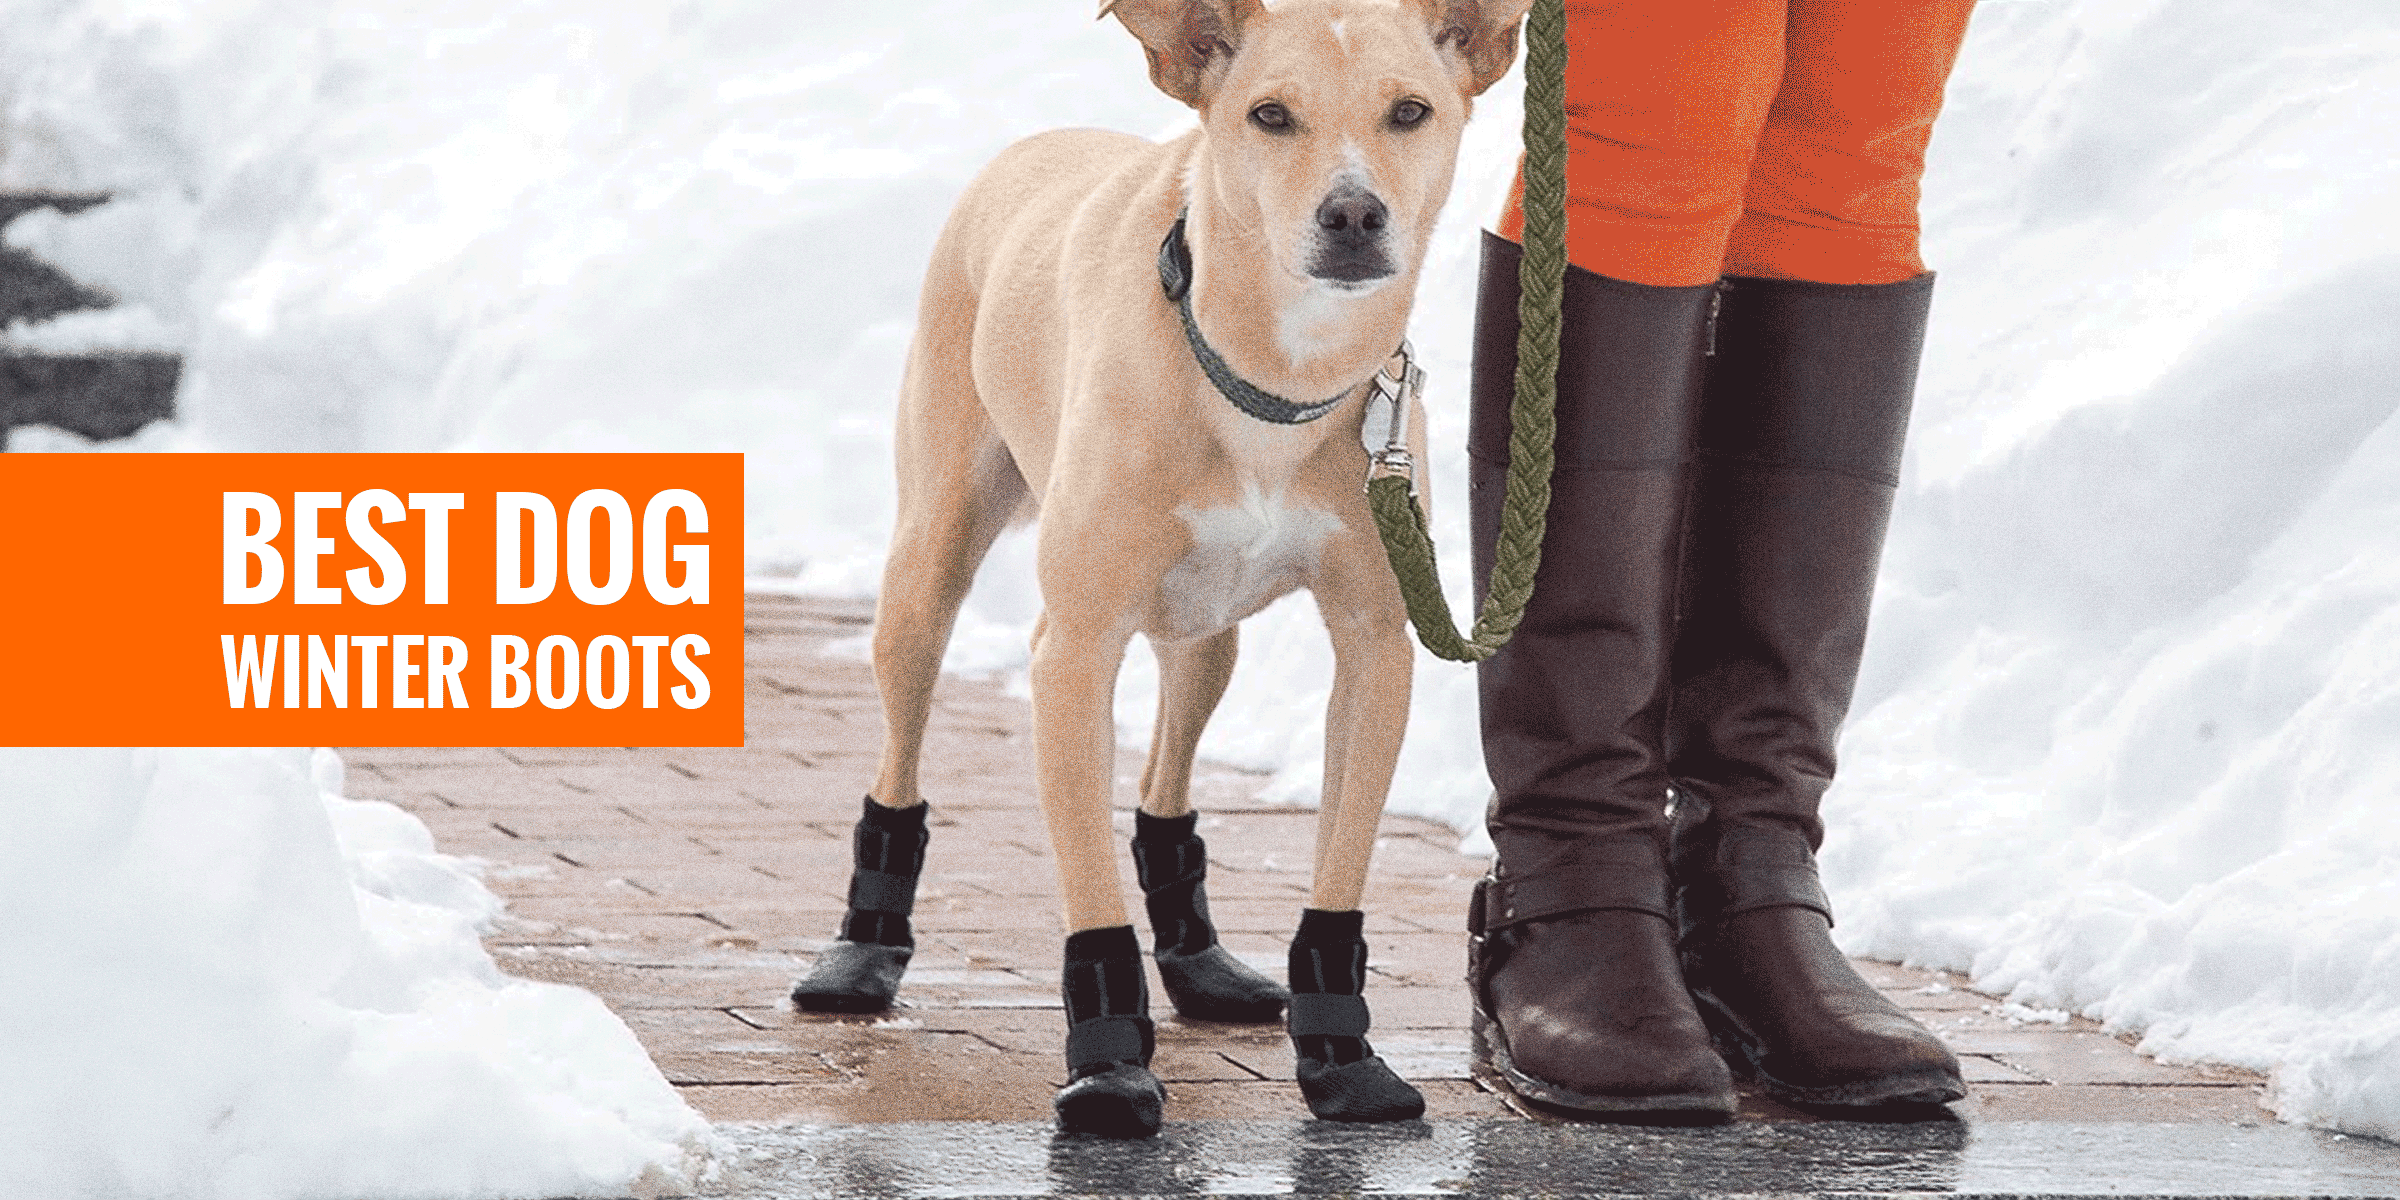 doggy boots for dogs